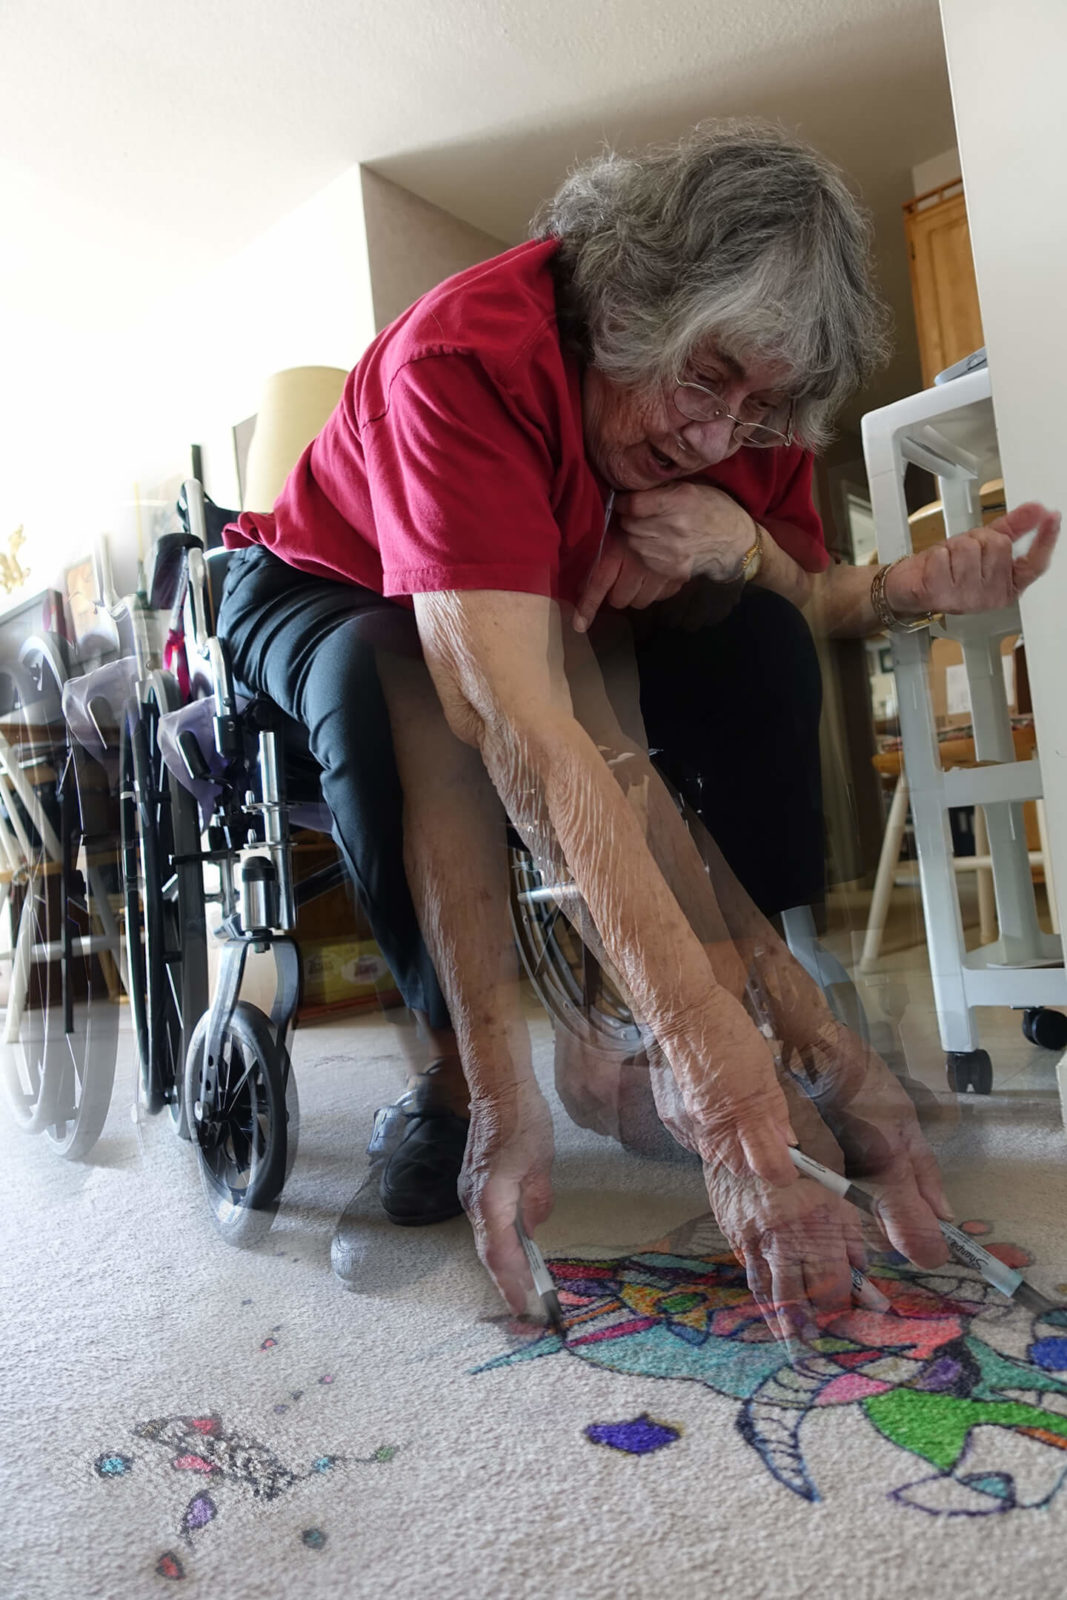 Robin Botie of Ithaca, New York, photoshops an old friend joyfully painting her carpet from a wheelchair.